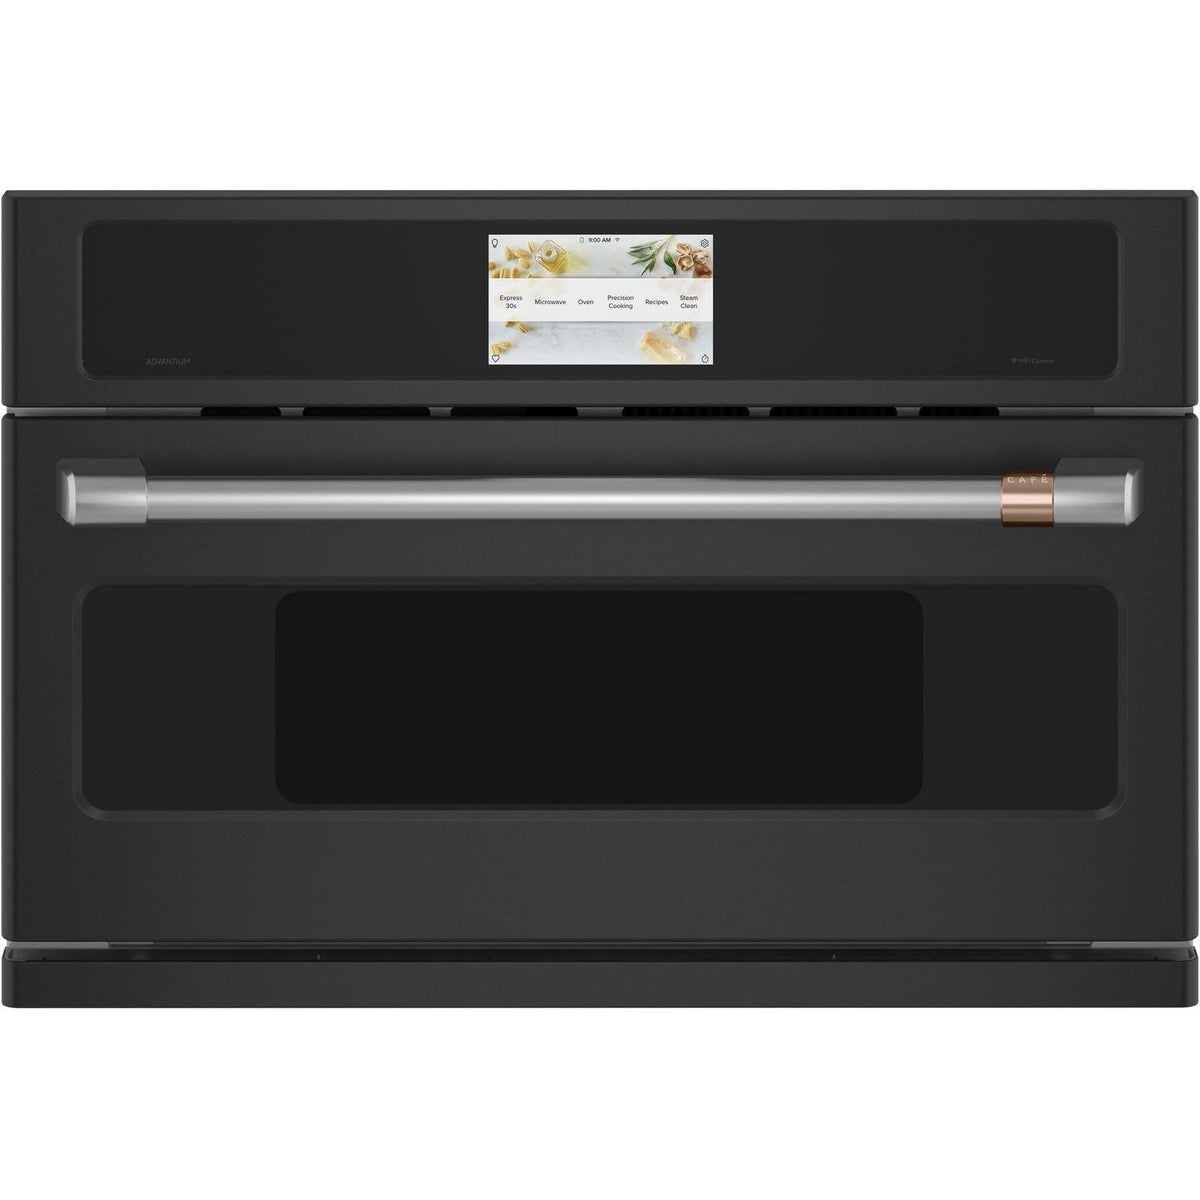 30-inch, 1.7 cu.ft. Built-in Single Wall Oven with Advantium® Technology CSB913P3ND1 IMAGE 1